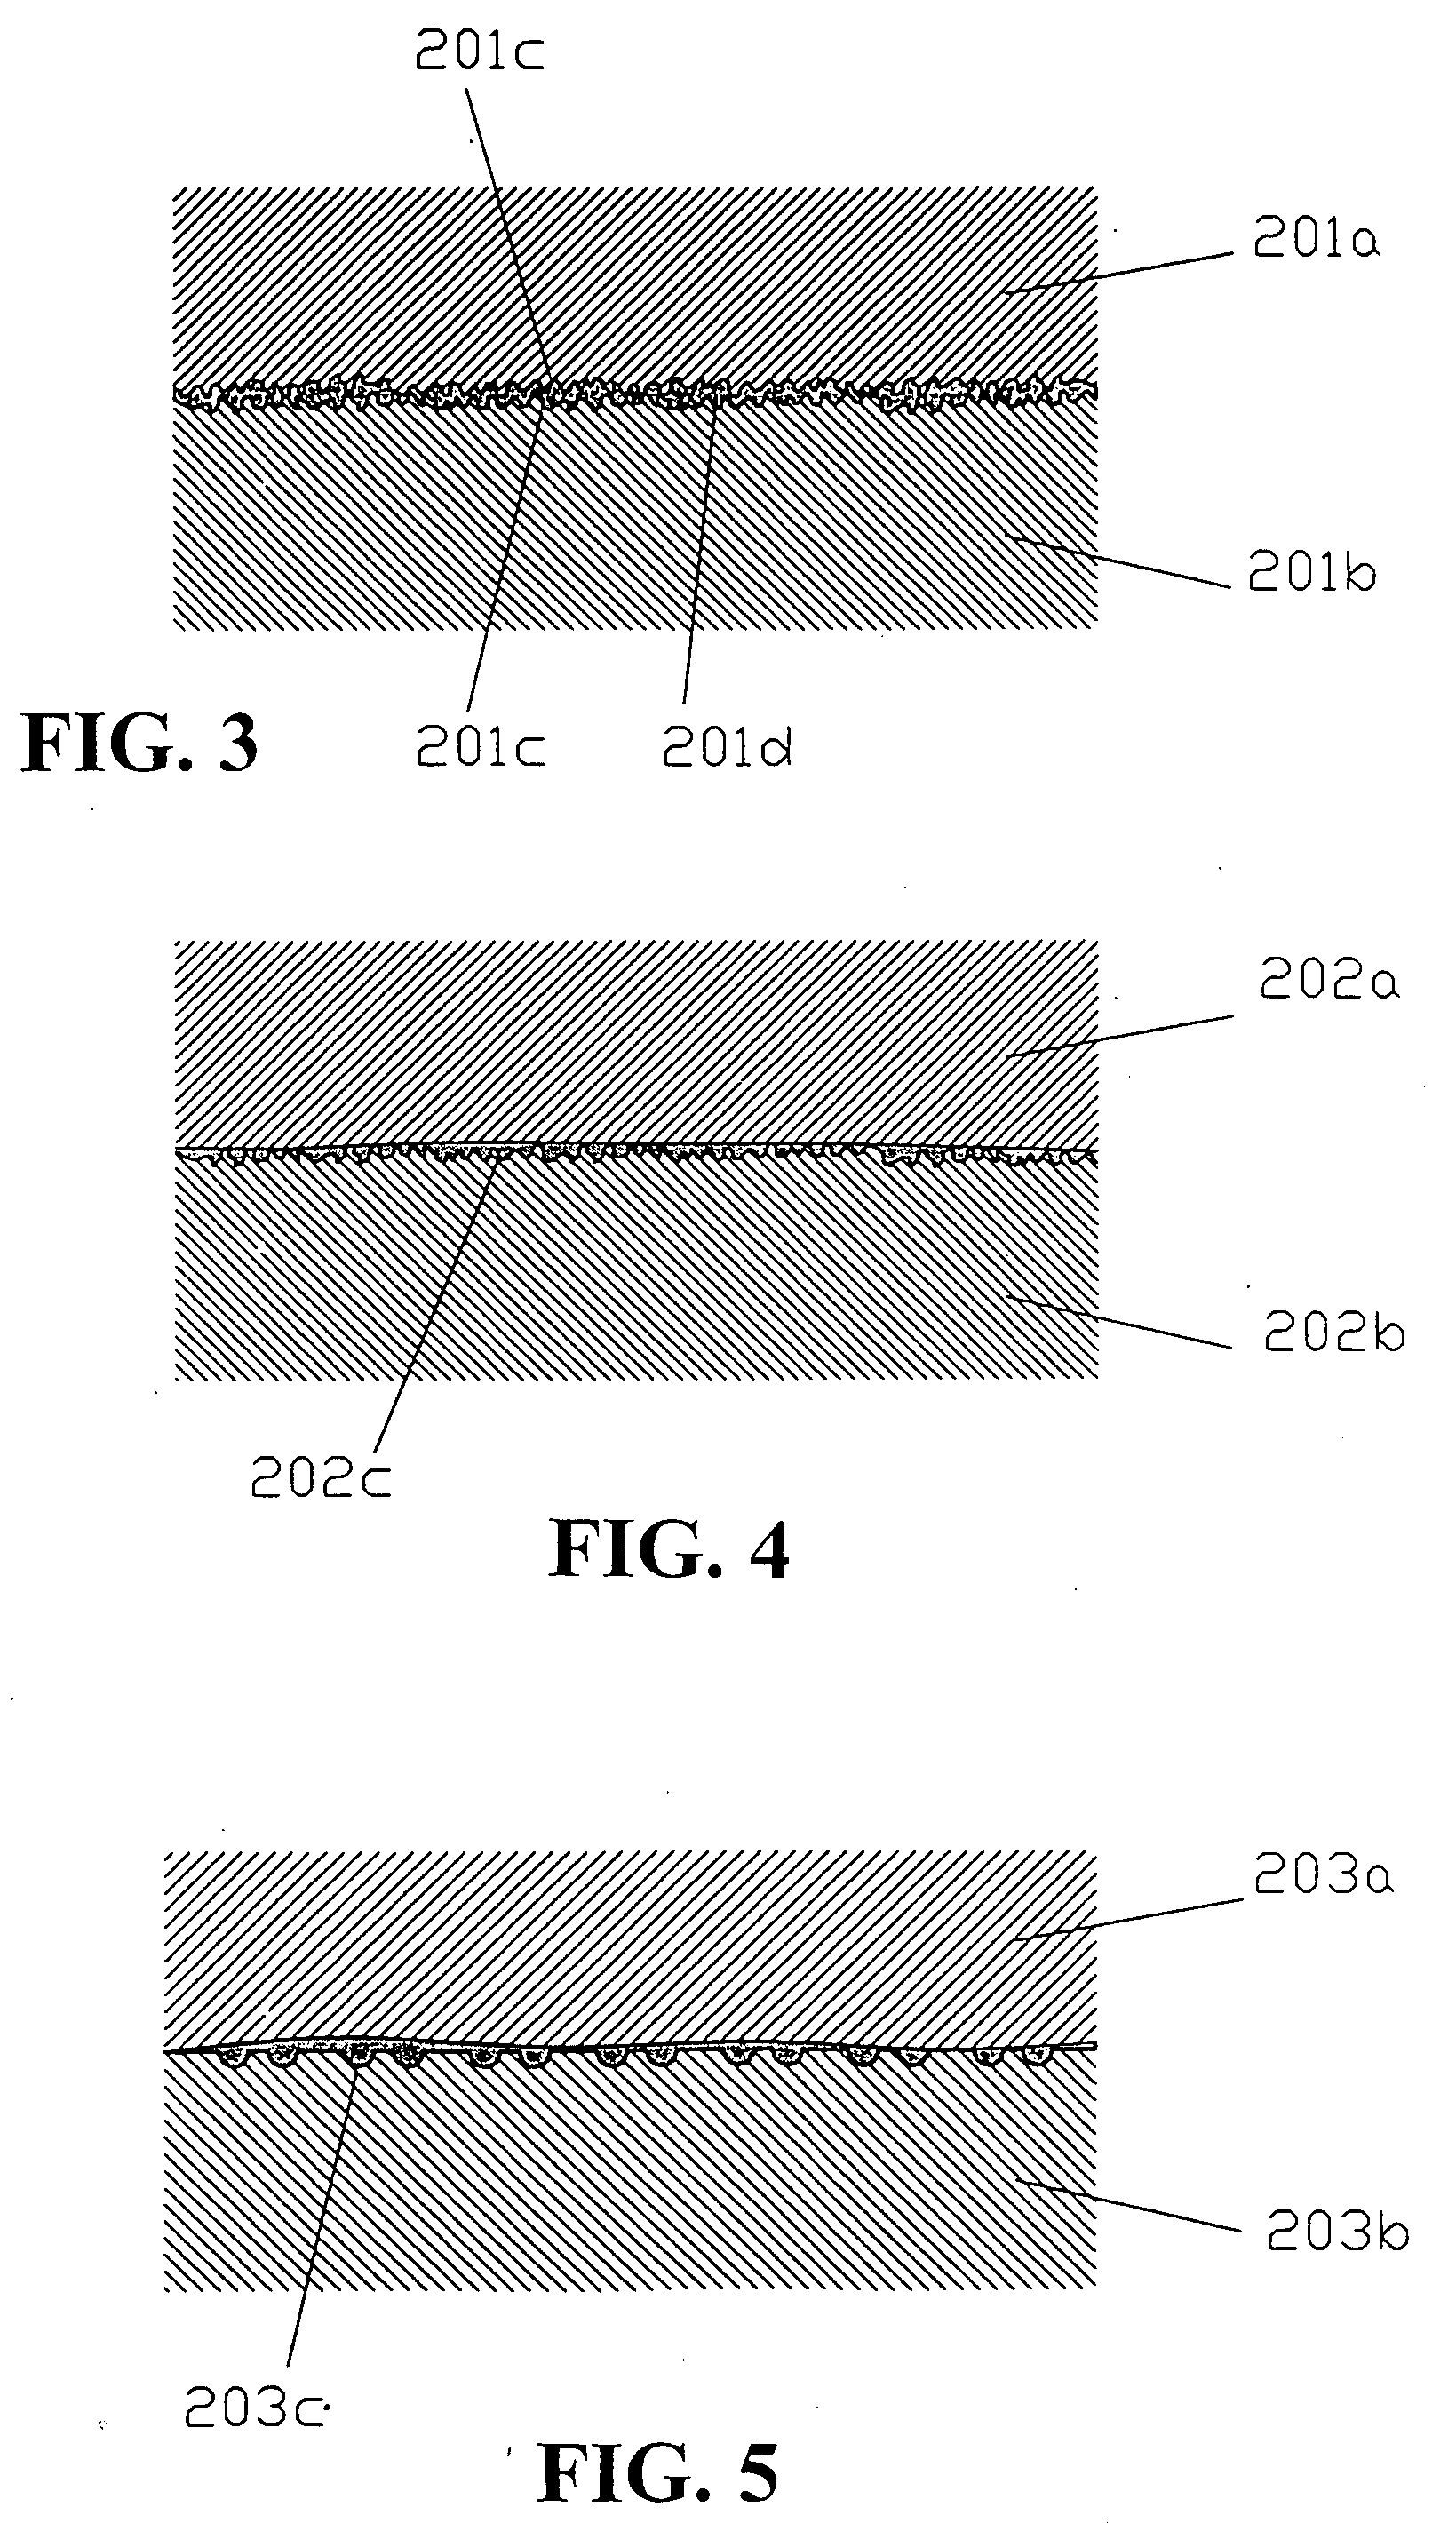 Low thermal resistance junction processing